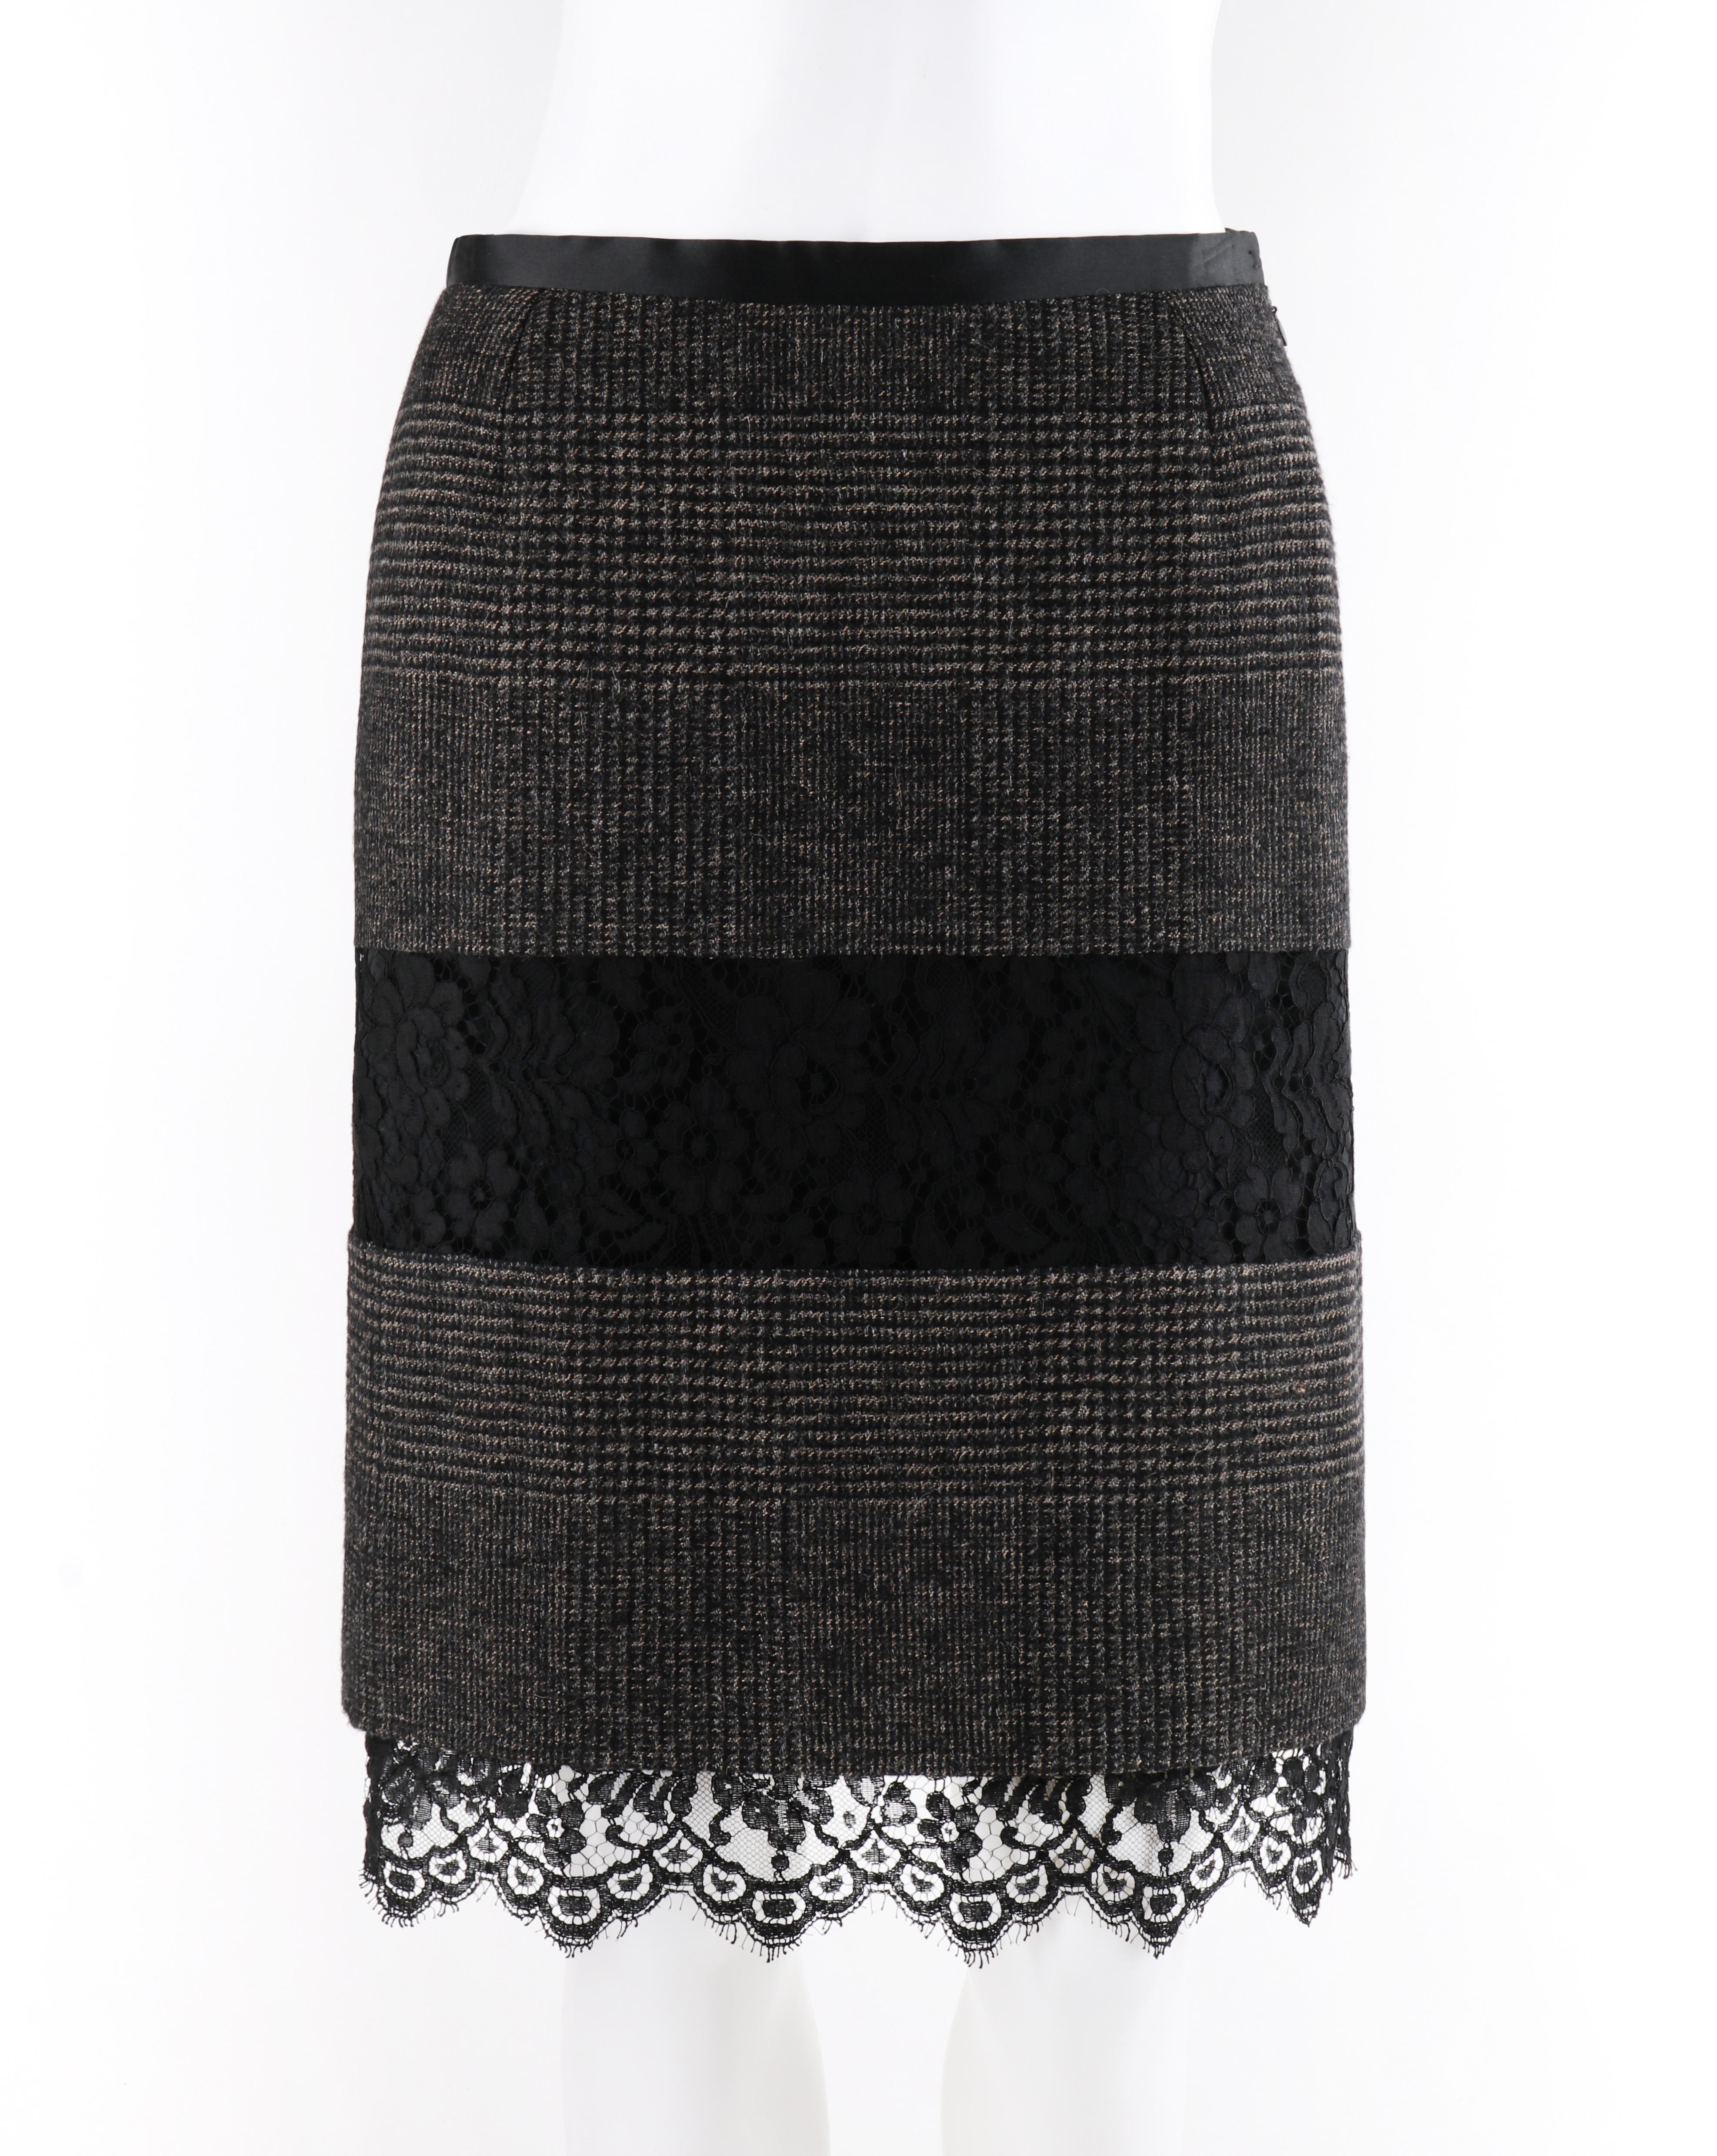 DOLCE & GABBANA A/W 2010 Black Gray Plaid Tweed Lace Trim Panel Sheath Skirt

Brand / Manufacturer: Dolce & Gabbana
Collection: A/W 2010
Designer: Stefano Gabbana, Domenico Dolce
Style: Sheath skirt with lace panels
Color(s): Shades of black and